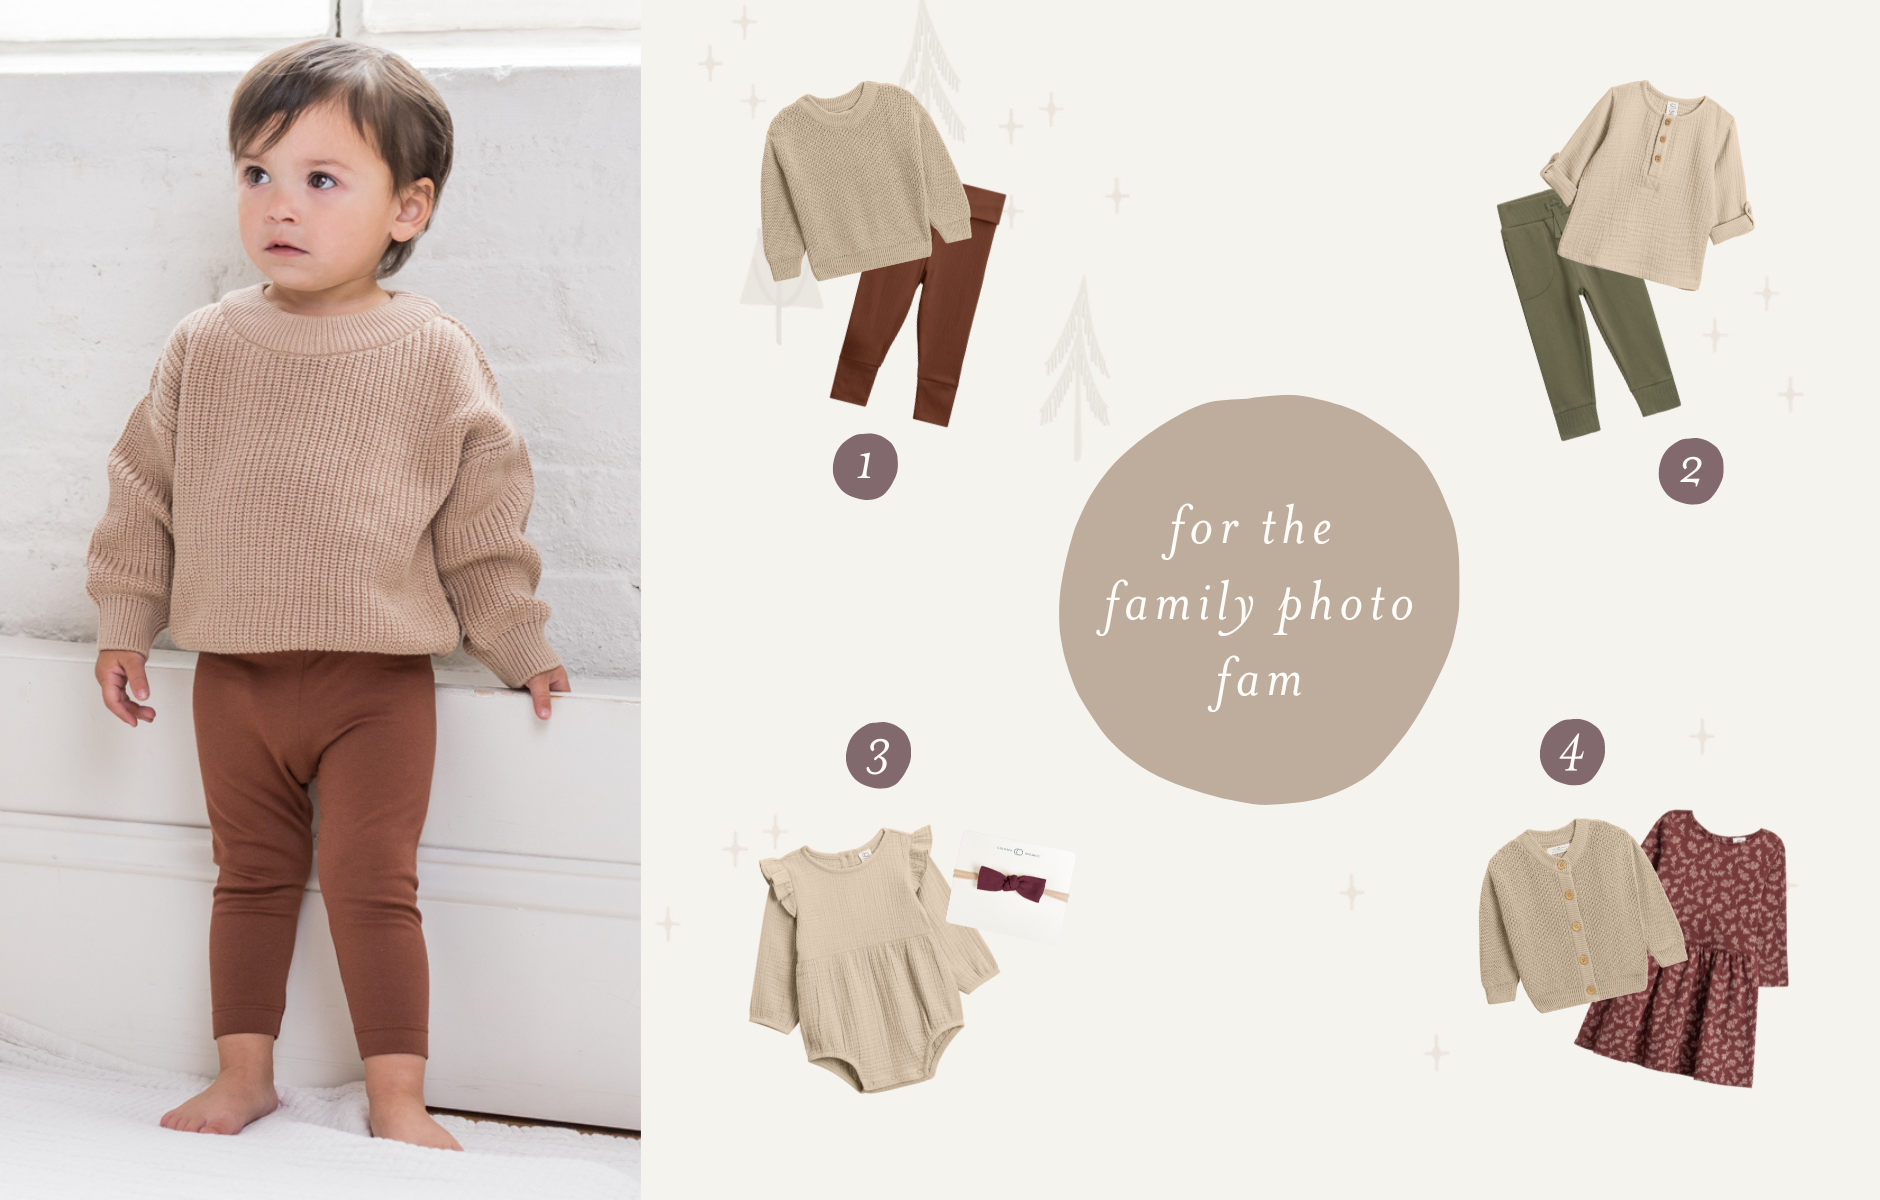 Thanksgiving Outfit Ideas for The Family Photo Fam